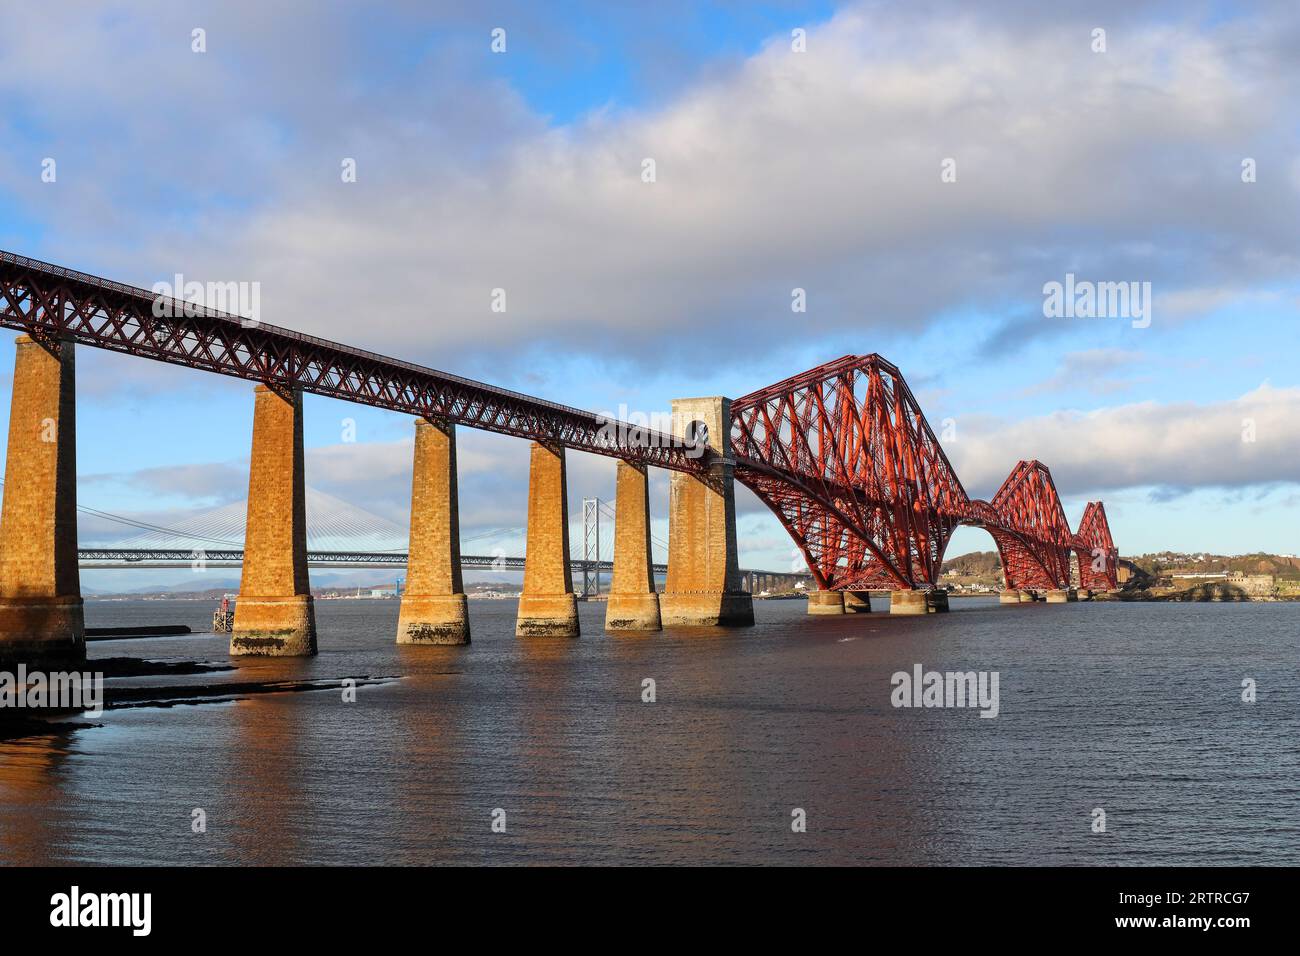 The Forth Bridge, cantilever railway bridge across the Firth of Forth, east of Scotland Stock Photo